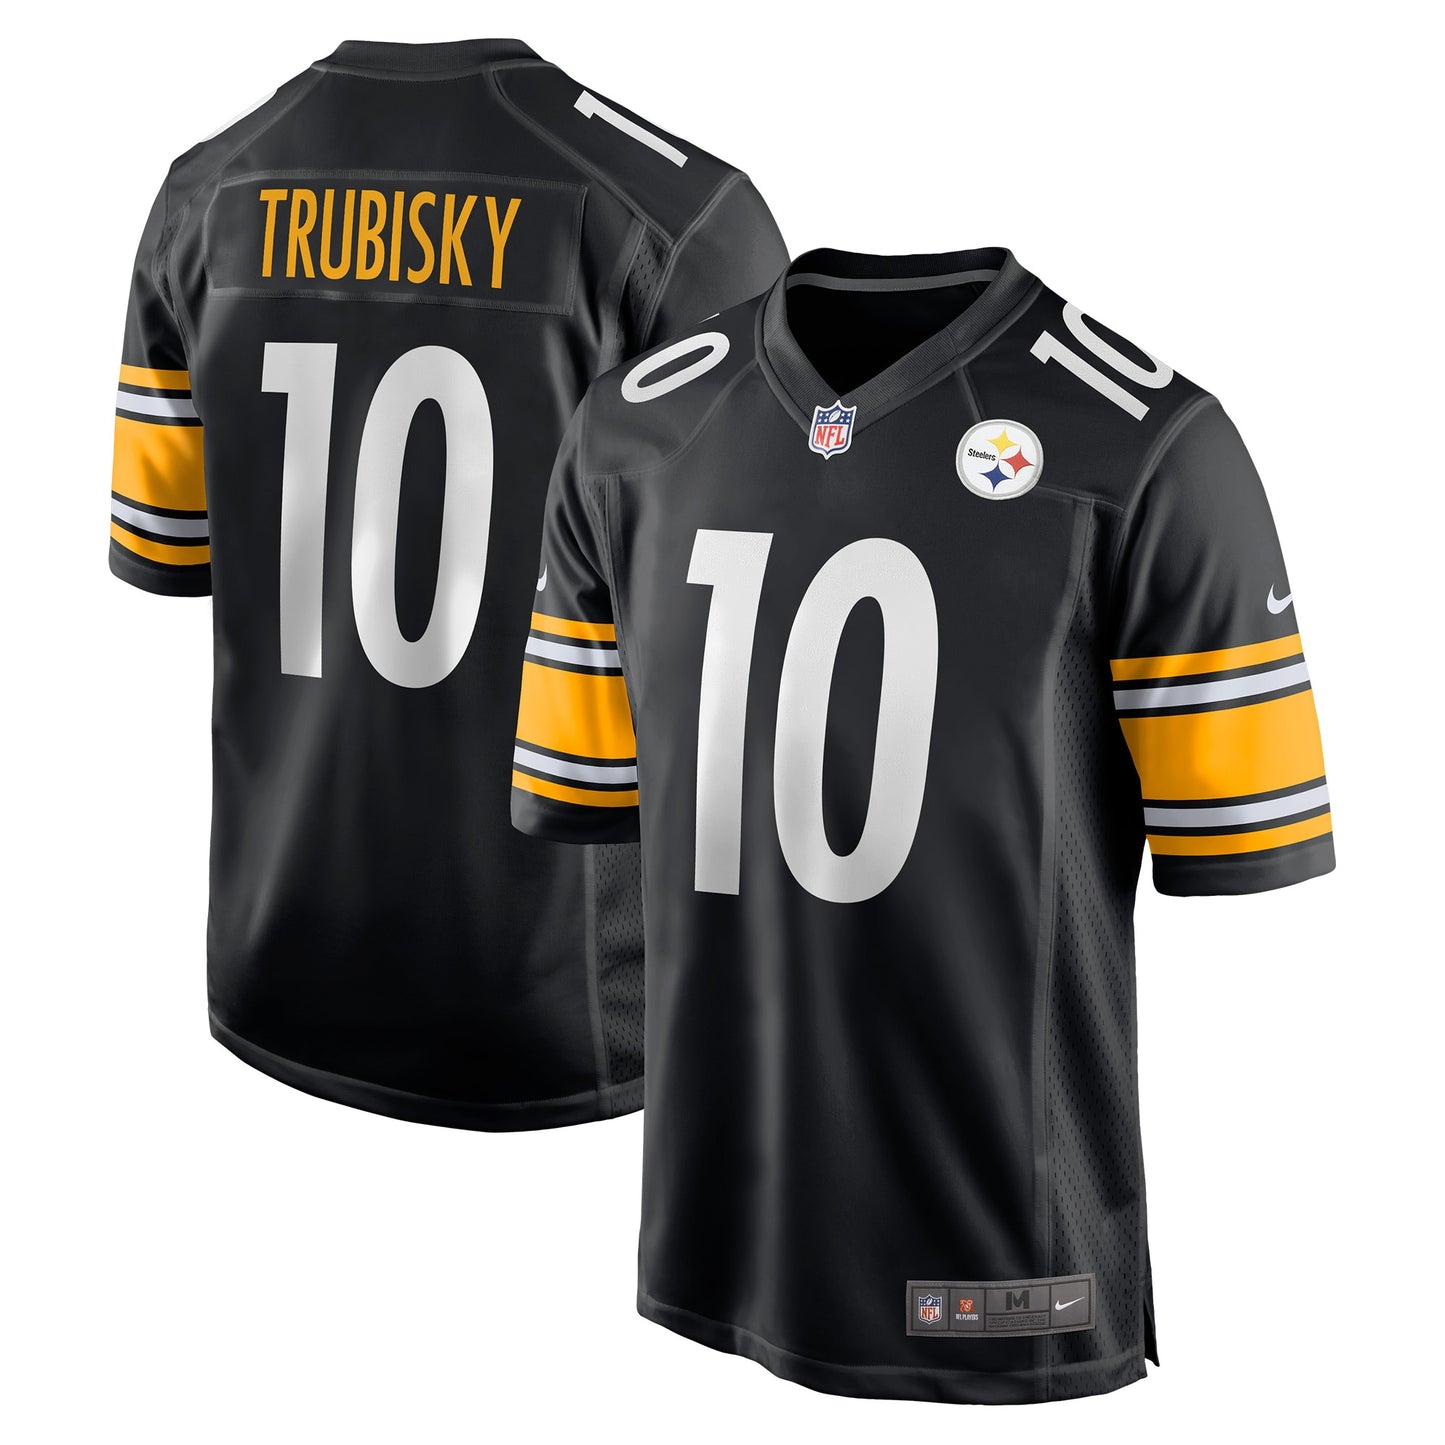 Mitchell Trubisky Pittsburgh Steelers Nike Game Jersey - Black